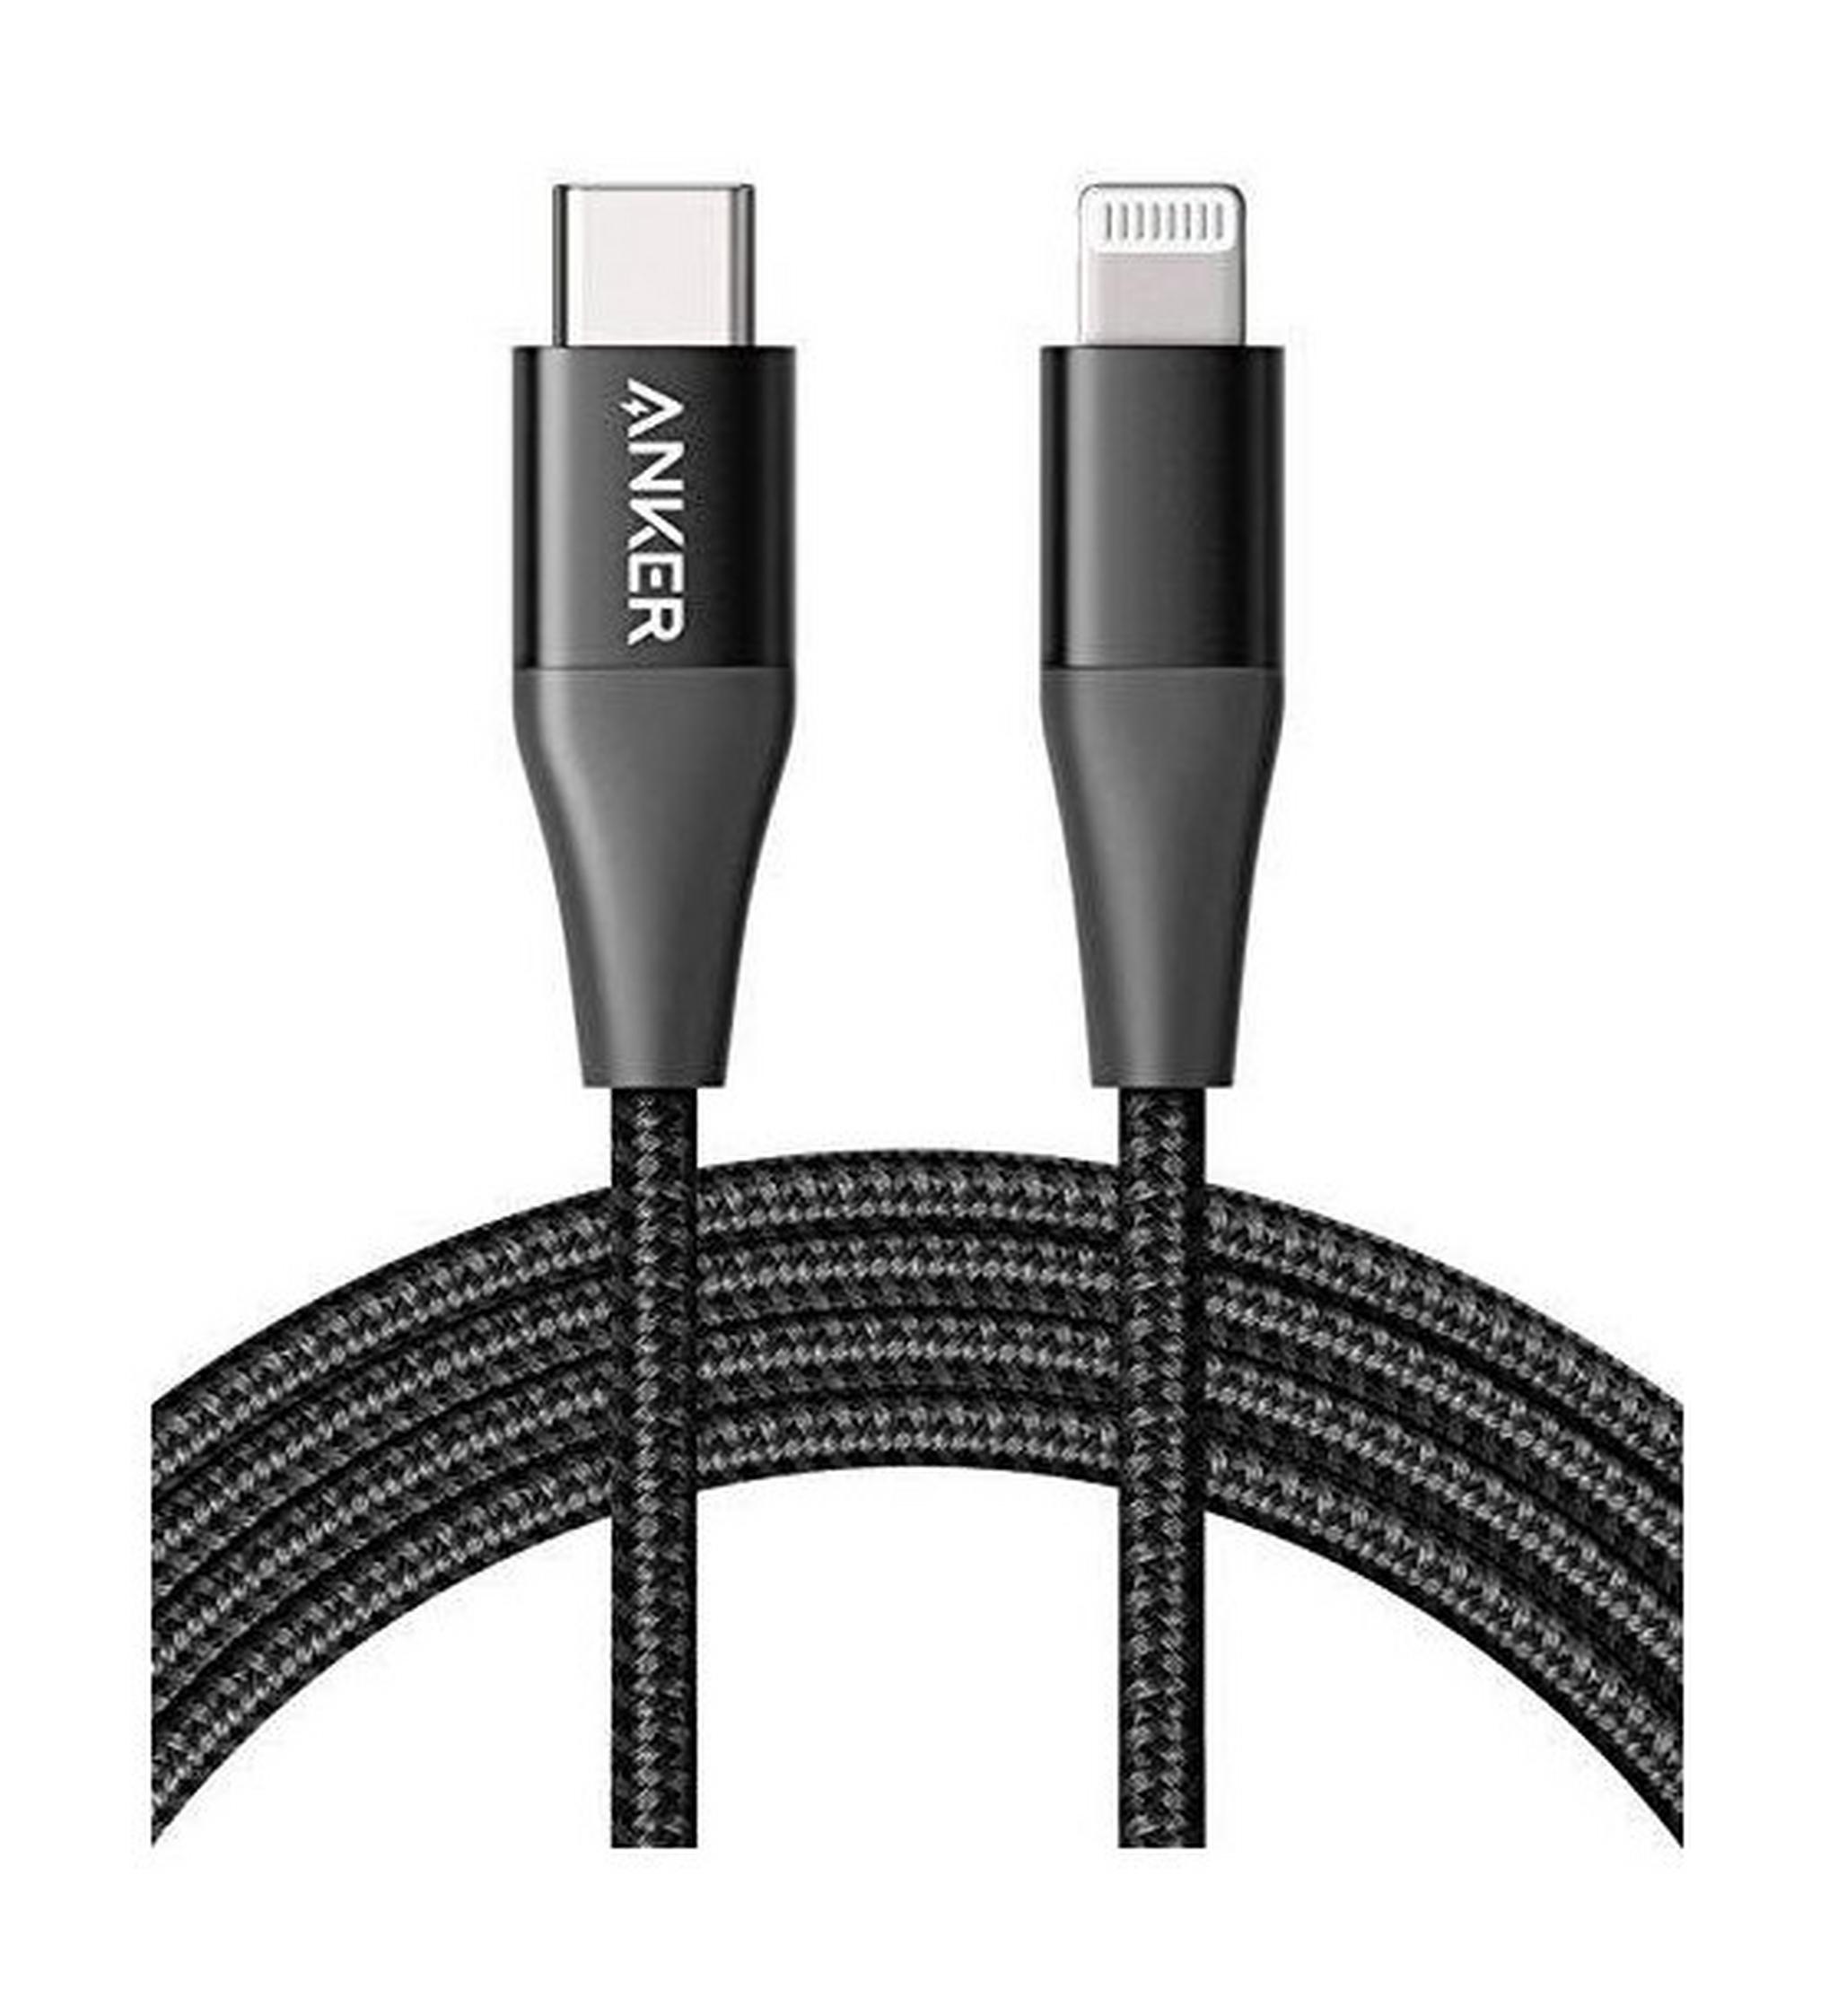 Anker PowerLine+ II 1.8m USB-C to Lightning Cable - Black